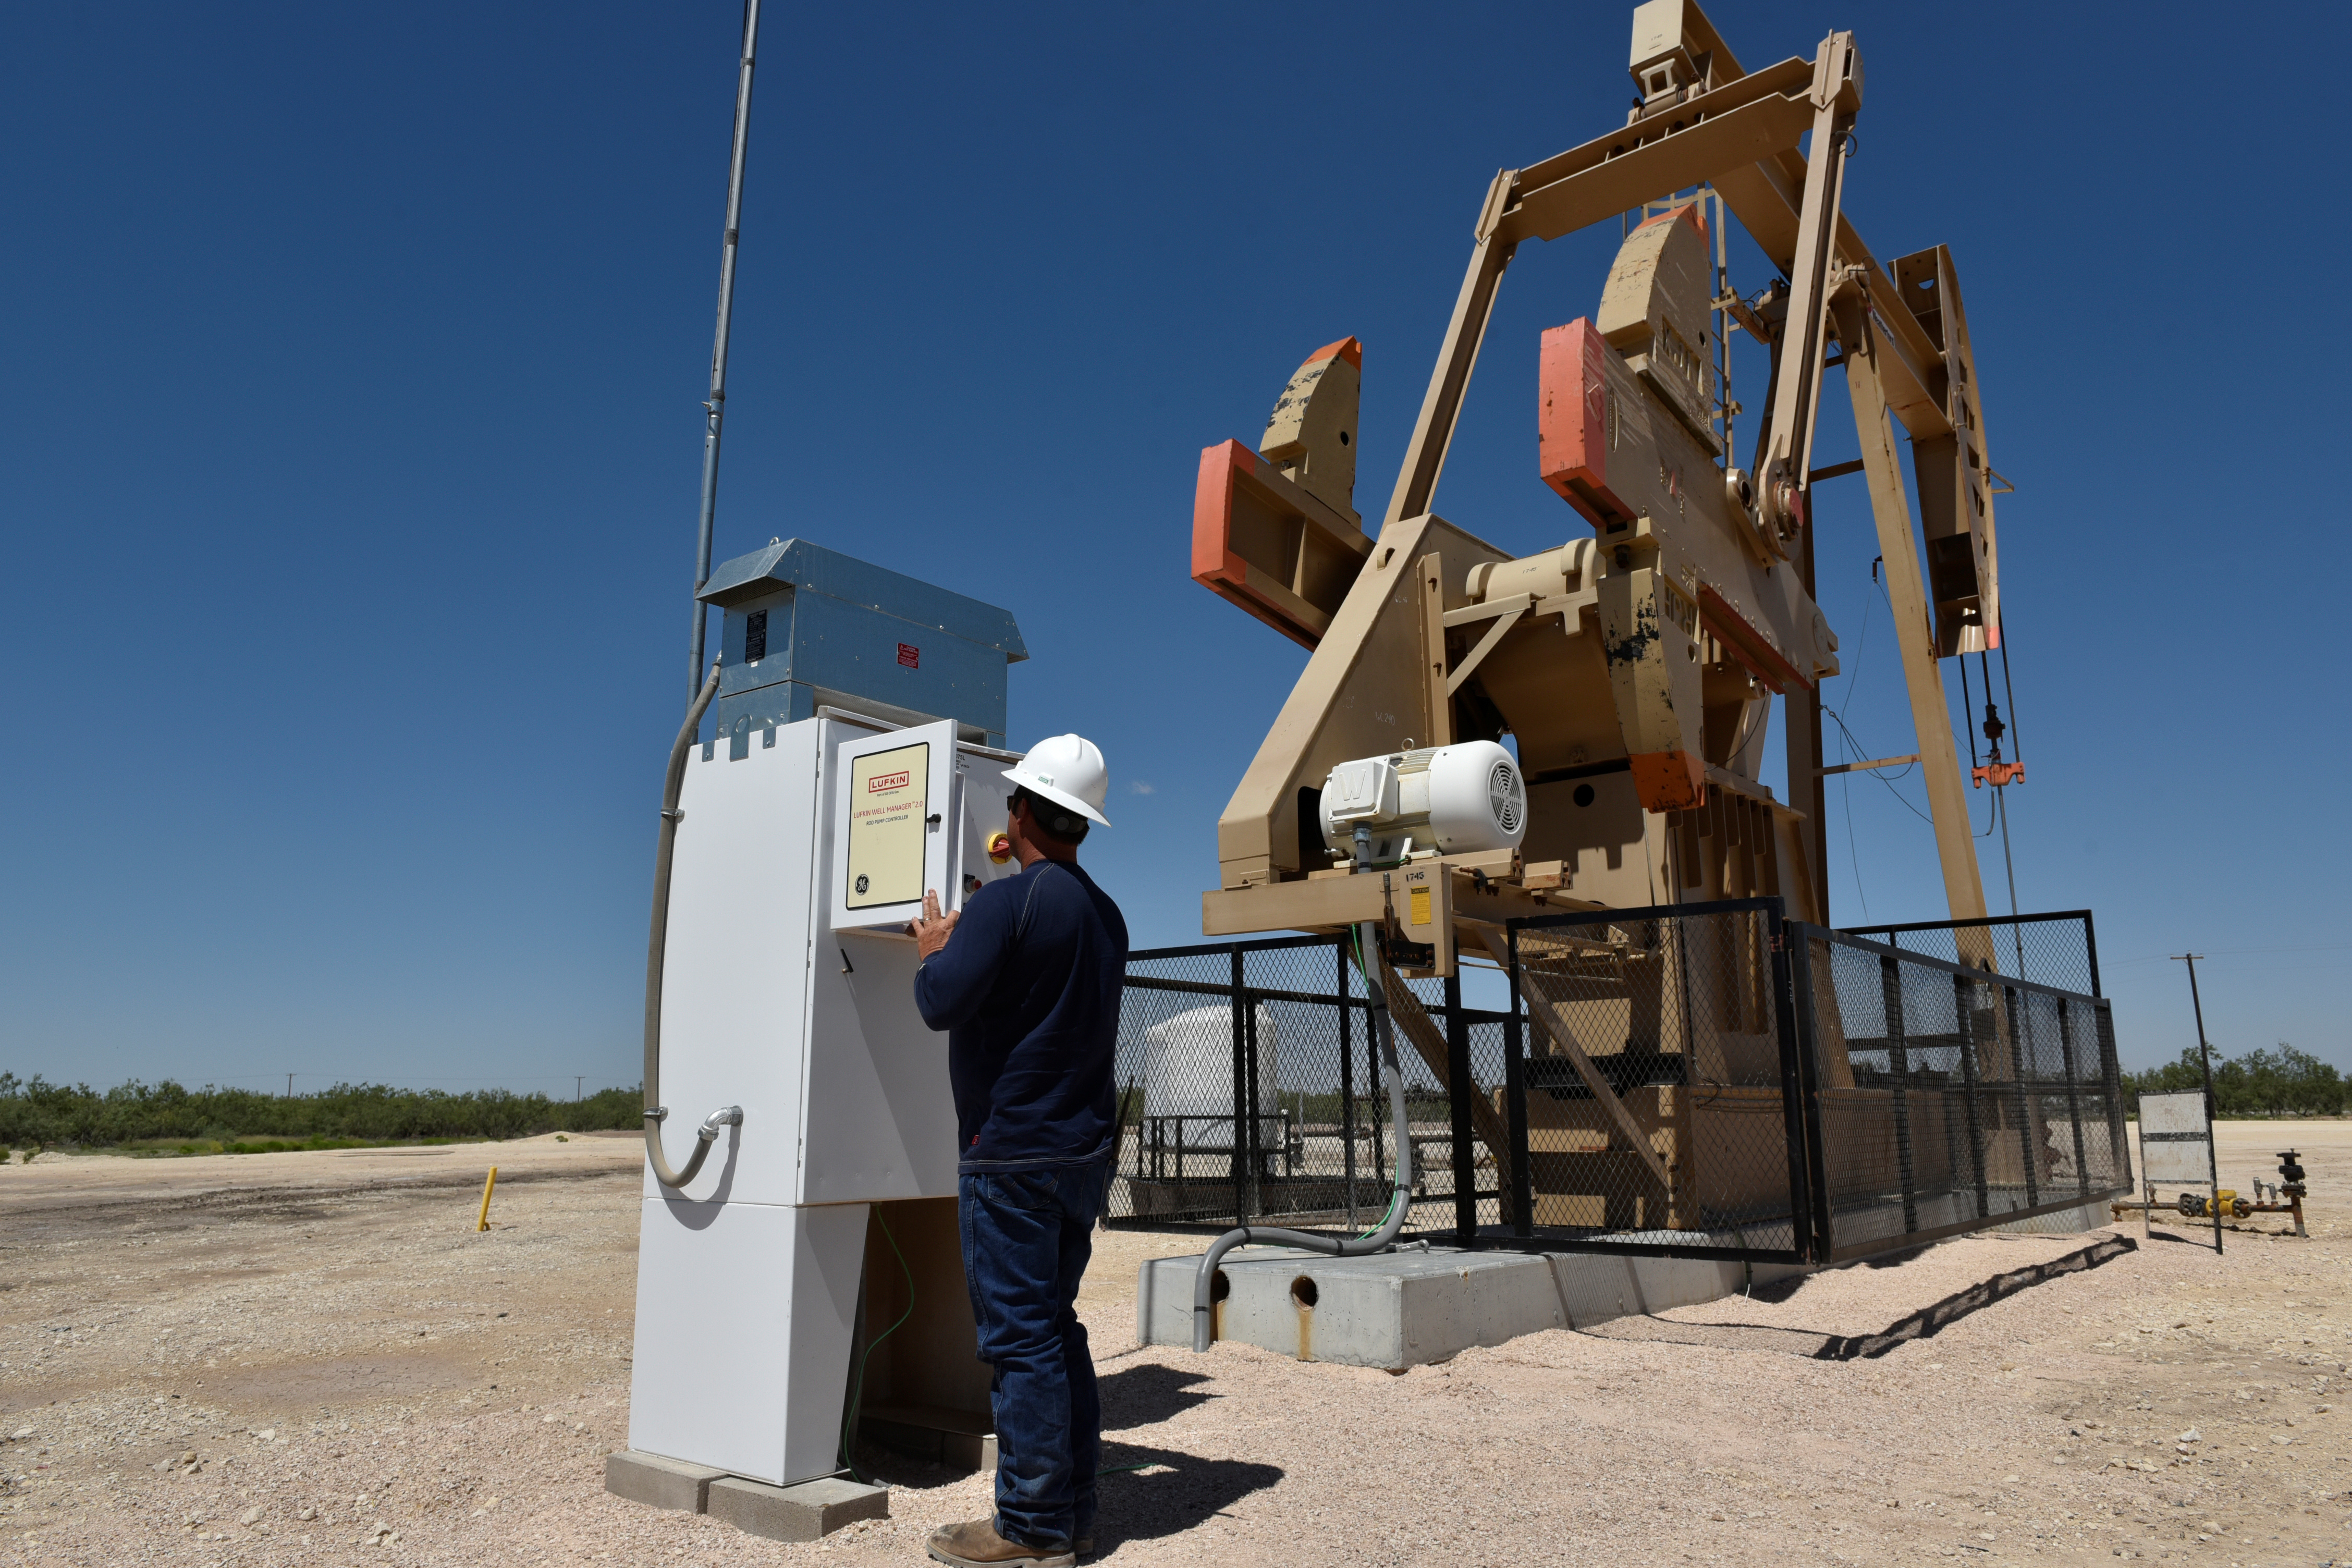 Lease Operator Jon Pearson checks well pressure on a lease owned by Parsley Energy in the Permian Basin near Midland